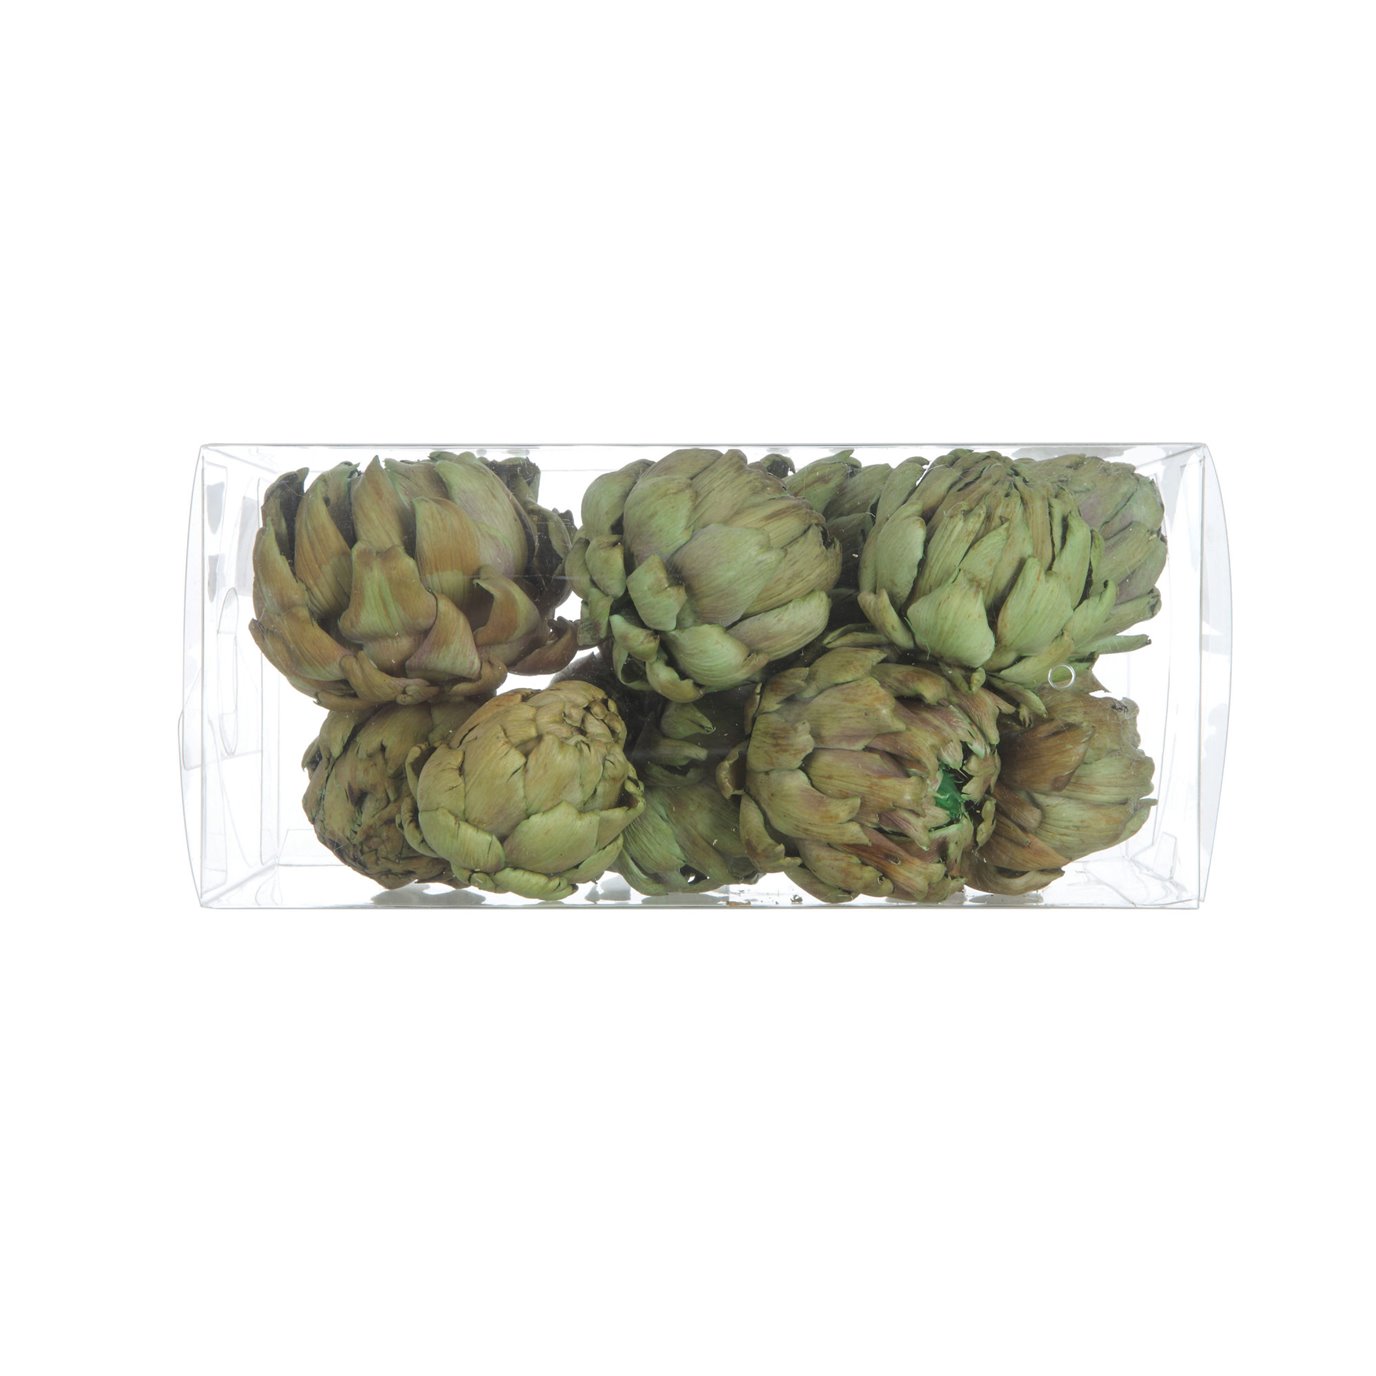 3" Dried Natural Artichokes (Boxed Set of 9 Styles)